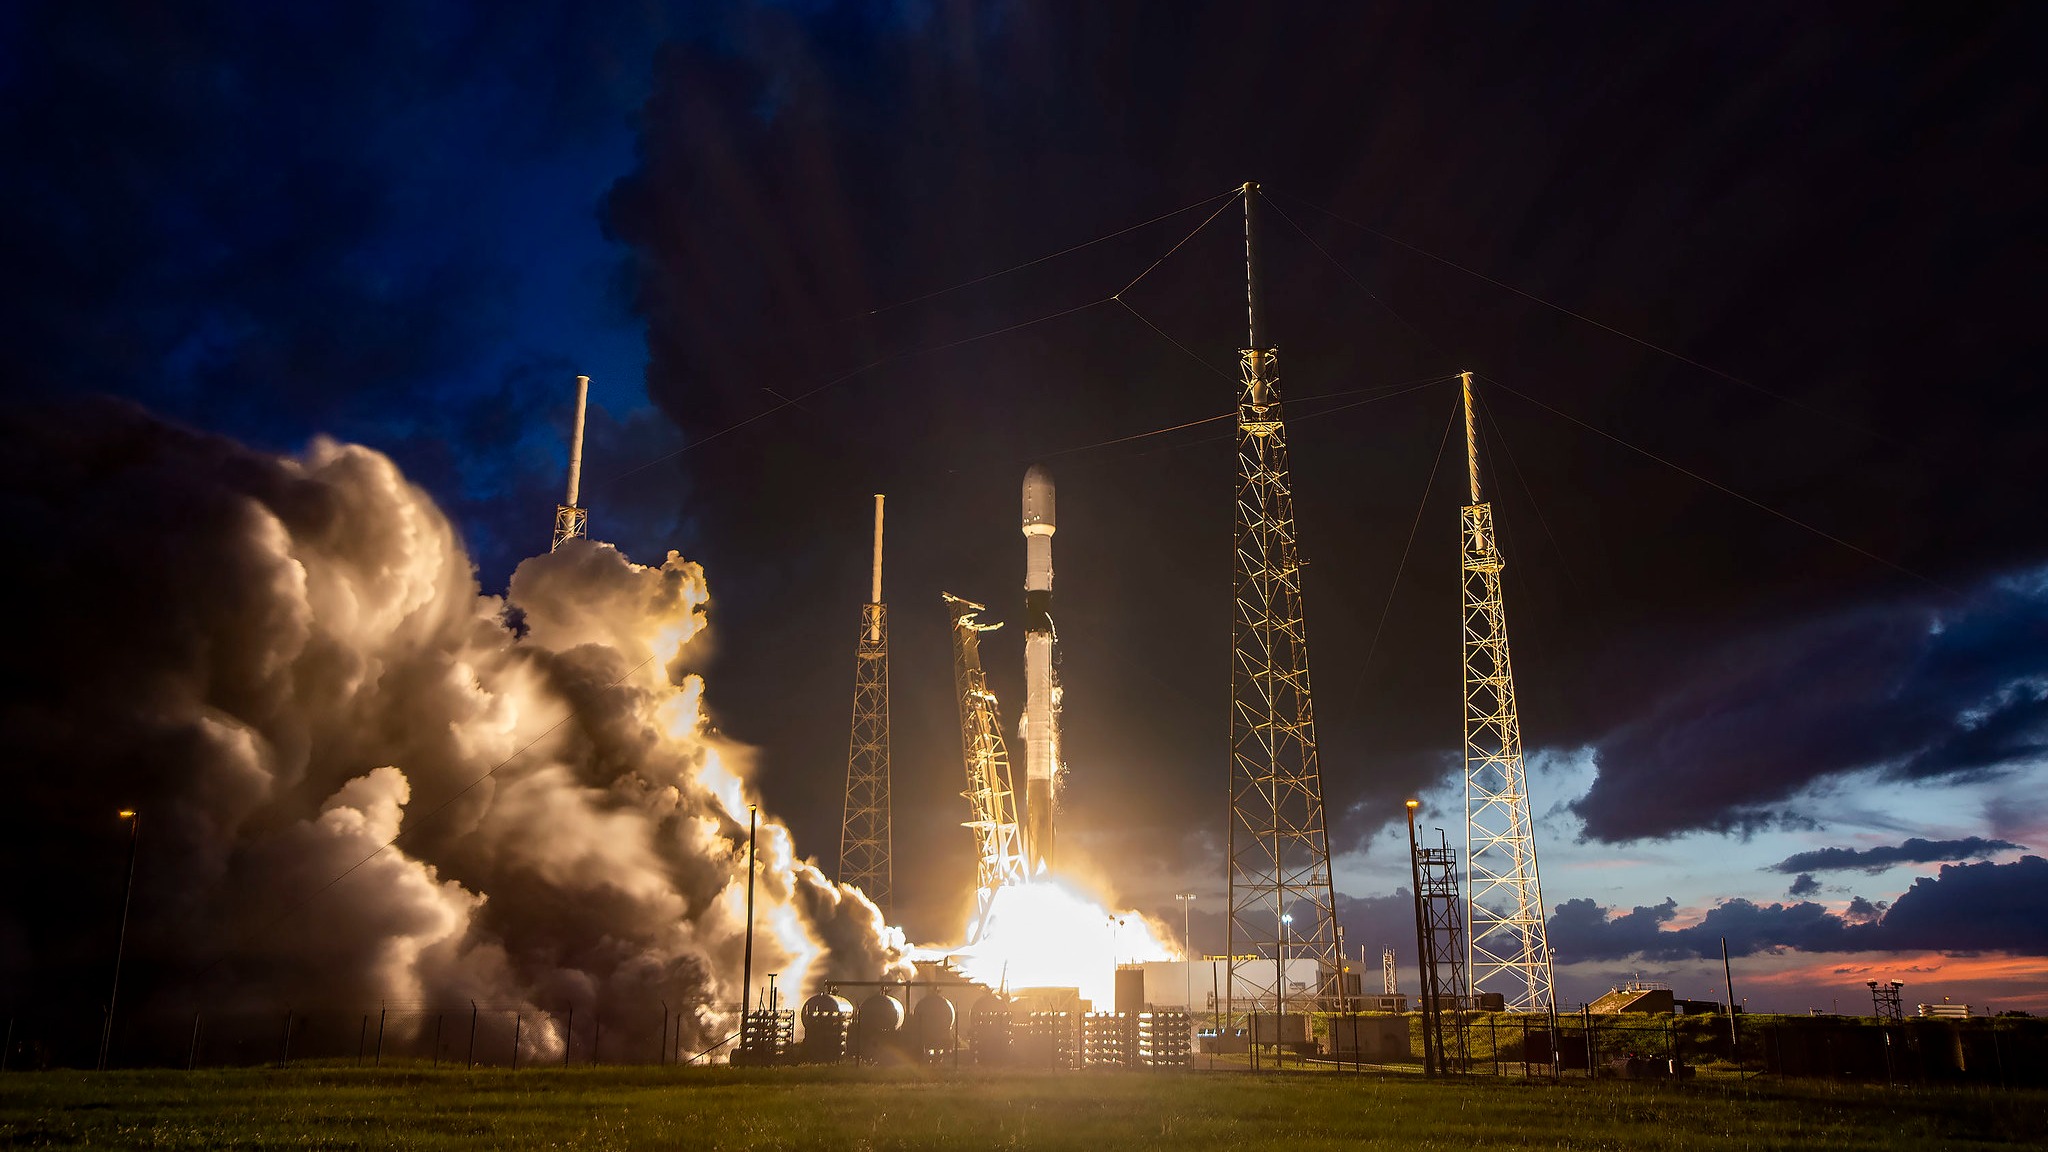 New rocket science course lets you learn about spaceflight online for free